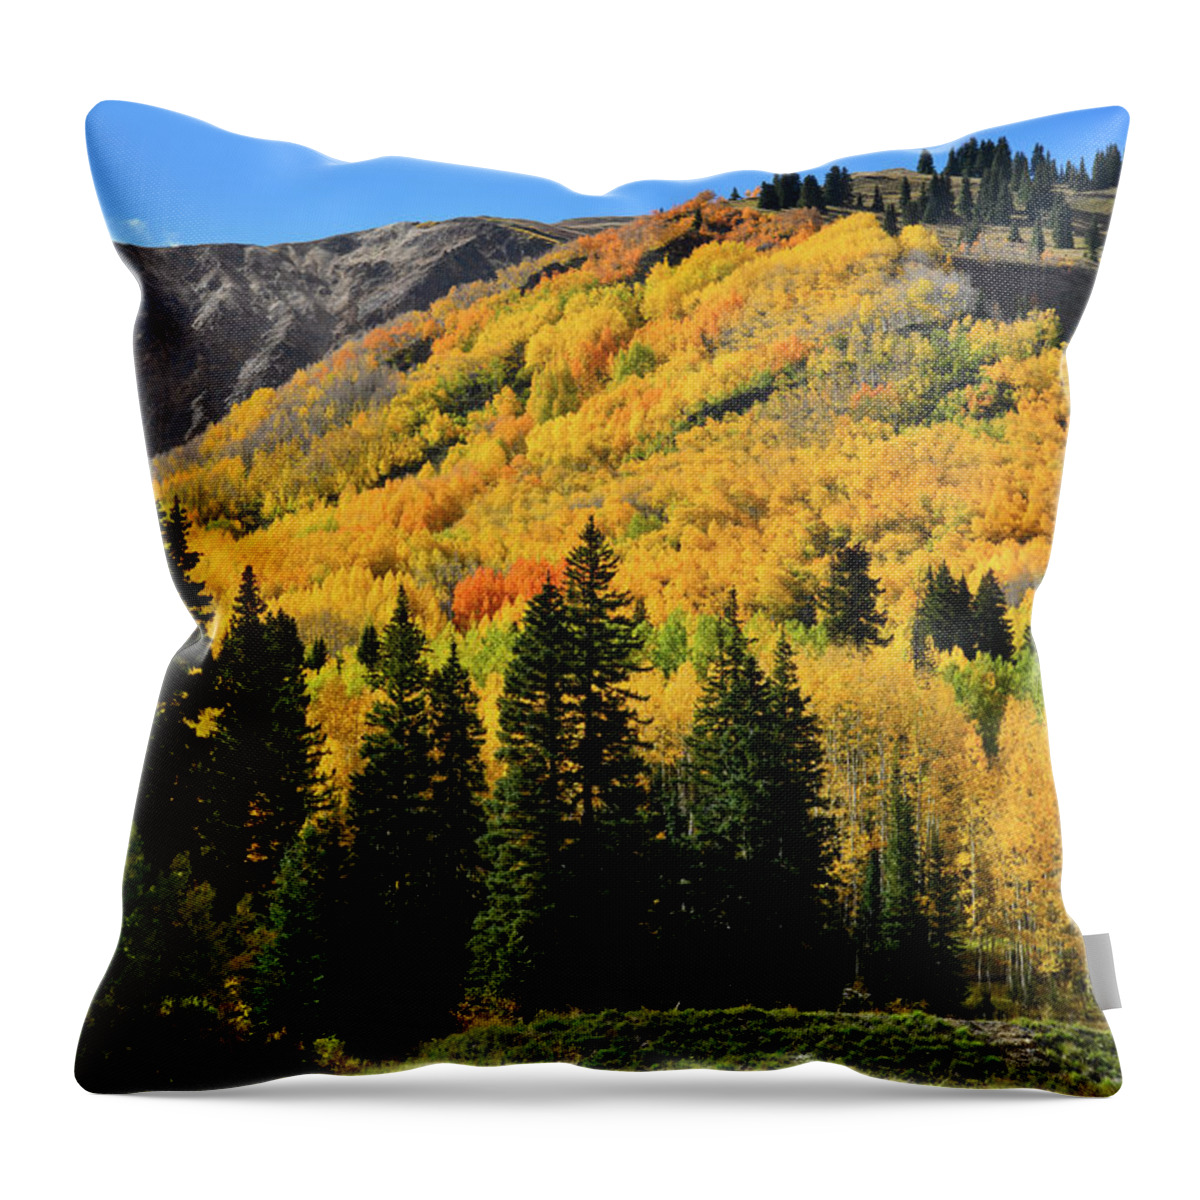 Colorado Throw Pillow featuring the photograph Golden Hillsides Along Million Dollar Highway by Ray Mathis